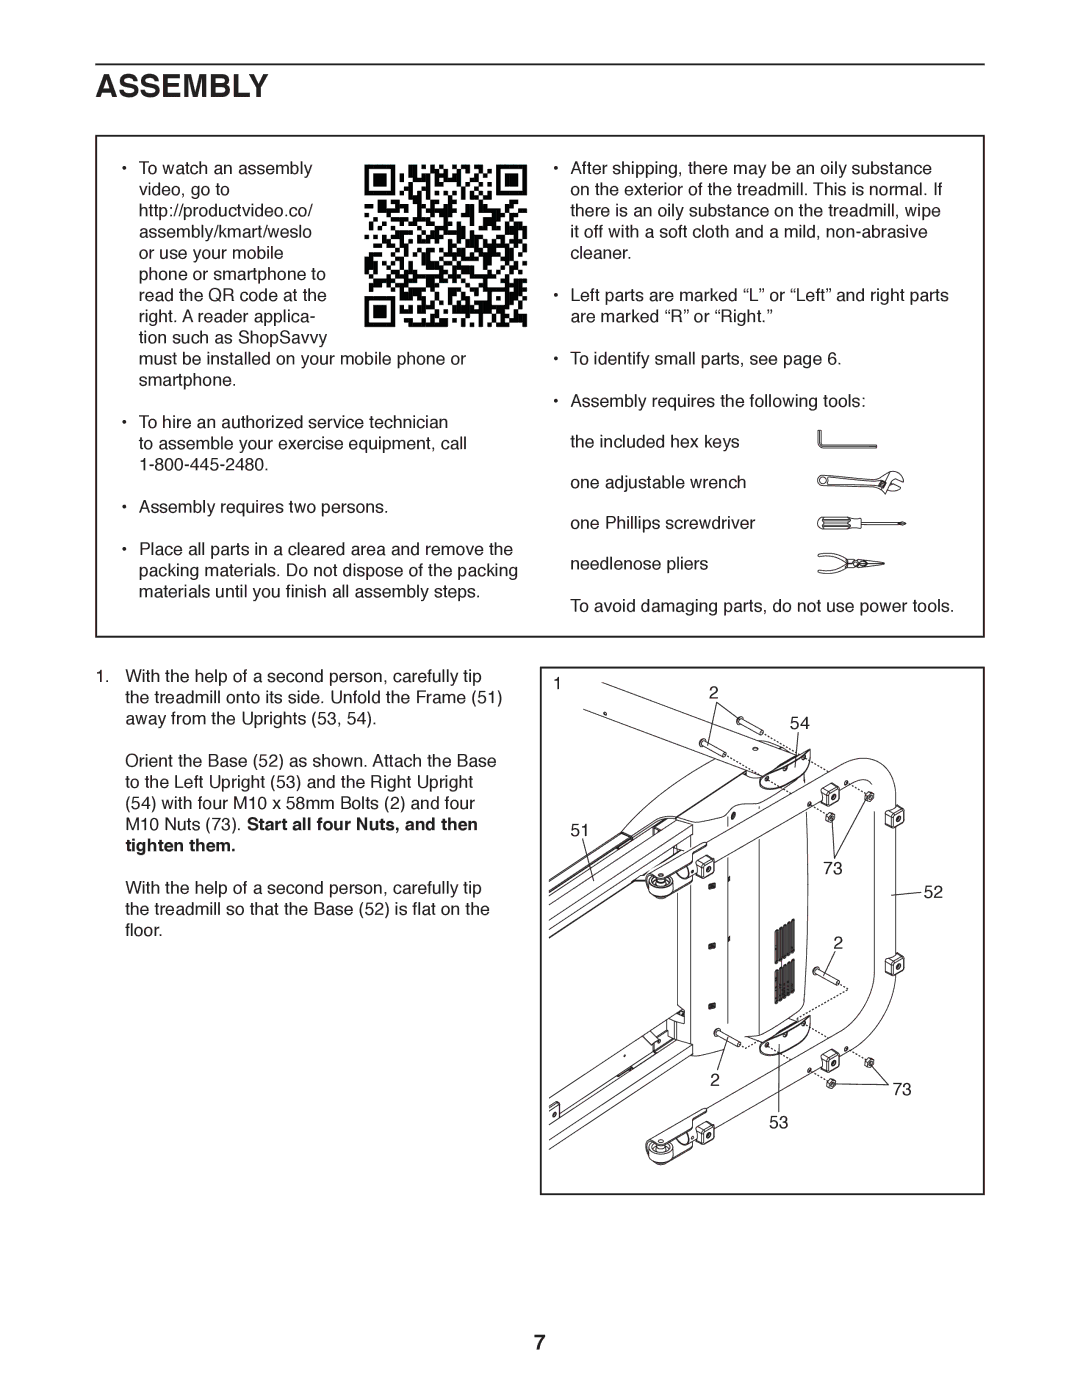 Weslo WLTL31312.0 user manual Assembly, M10 Nuts 73. Start all four Nuts, and then Tighten them 